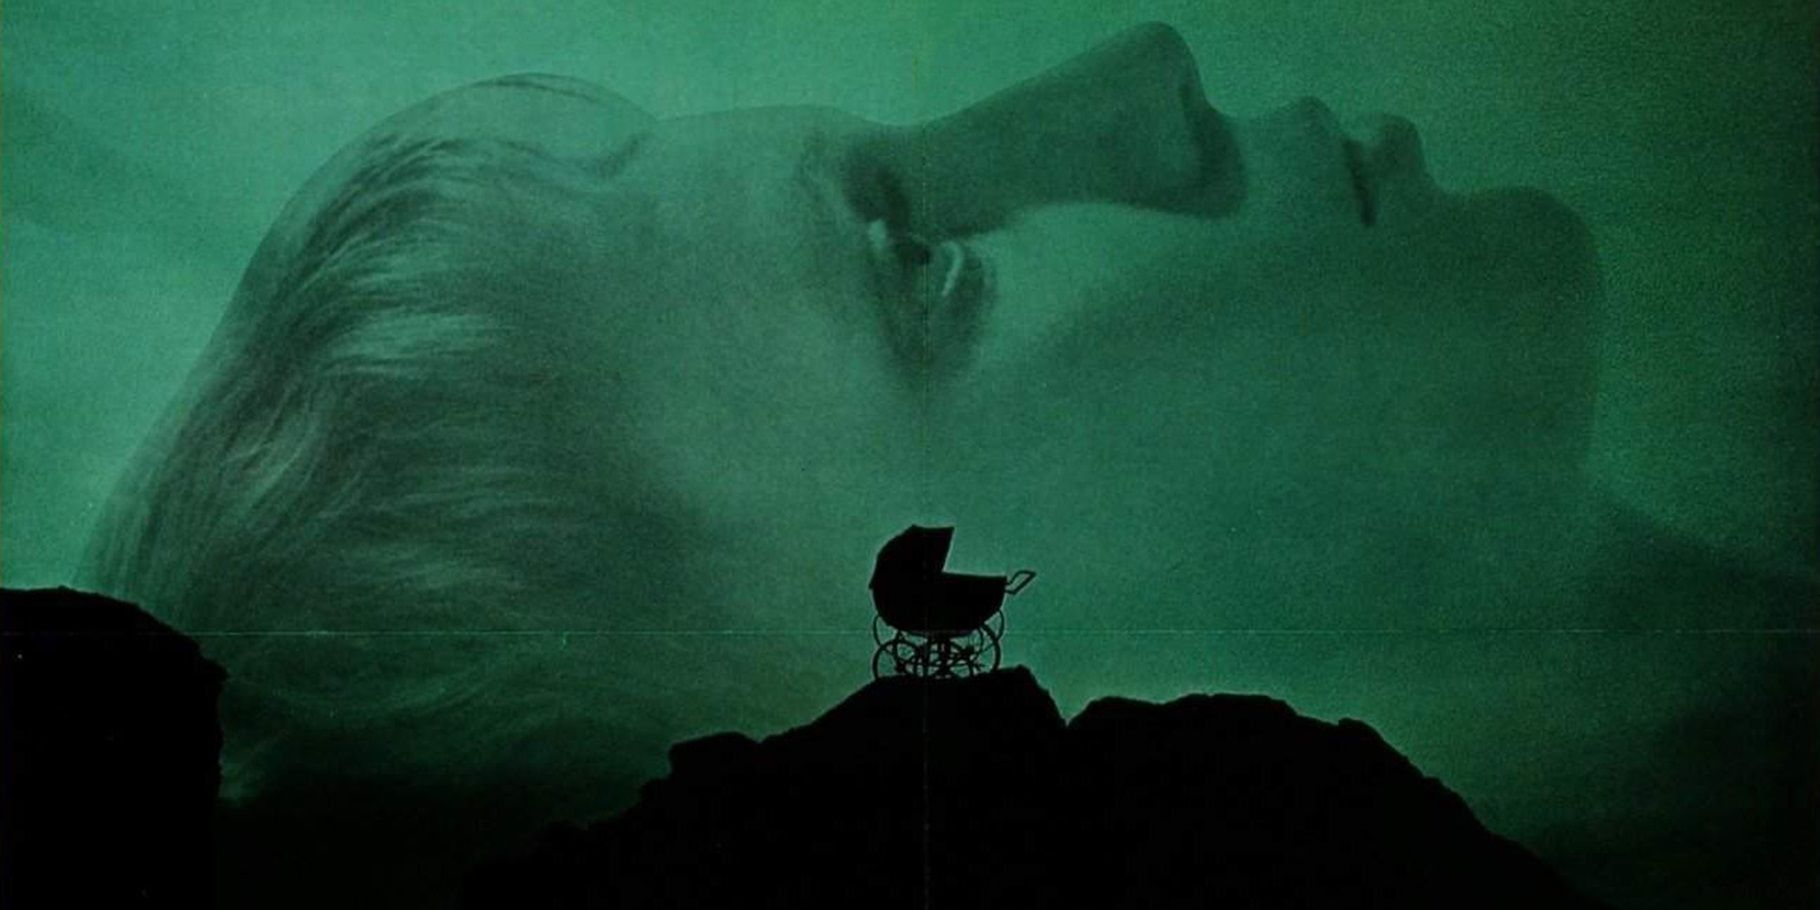 The poster for Rosemary's Baby